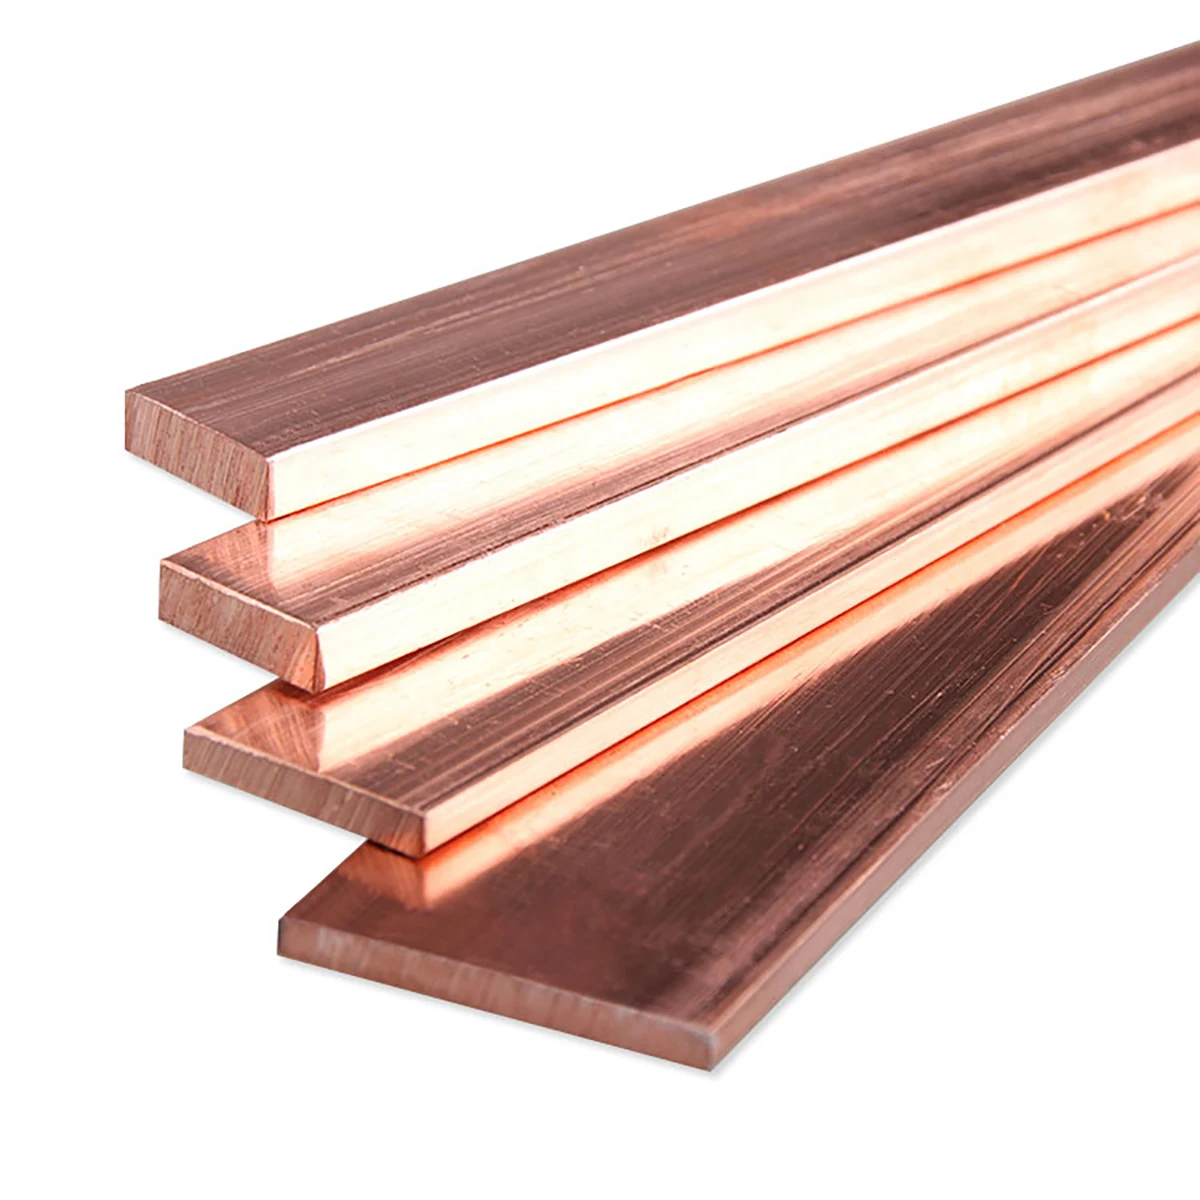 Metal T2 Copper Flat Bar/Rod Plate 100mm 500mm Long Multiple Size available 